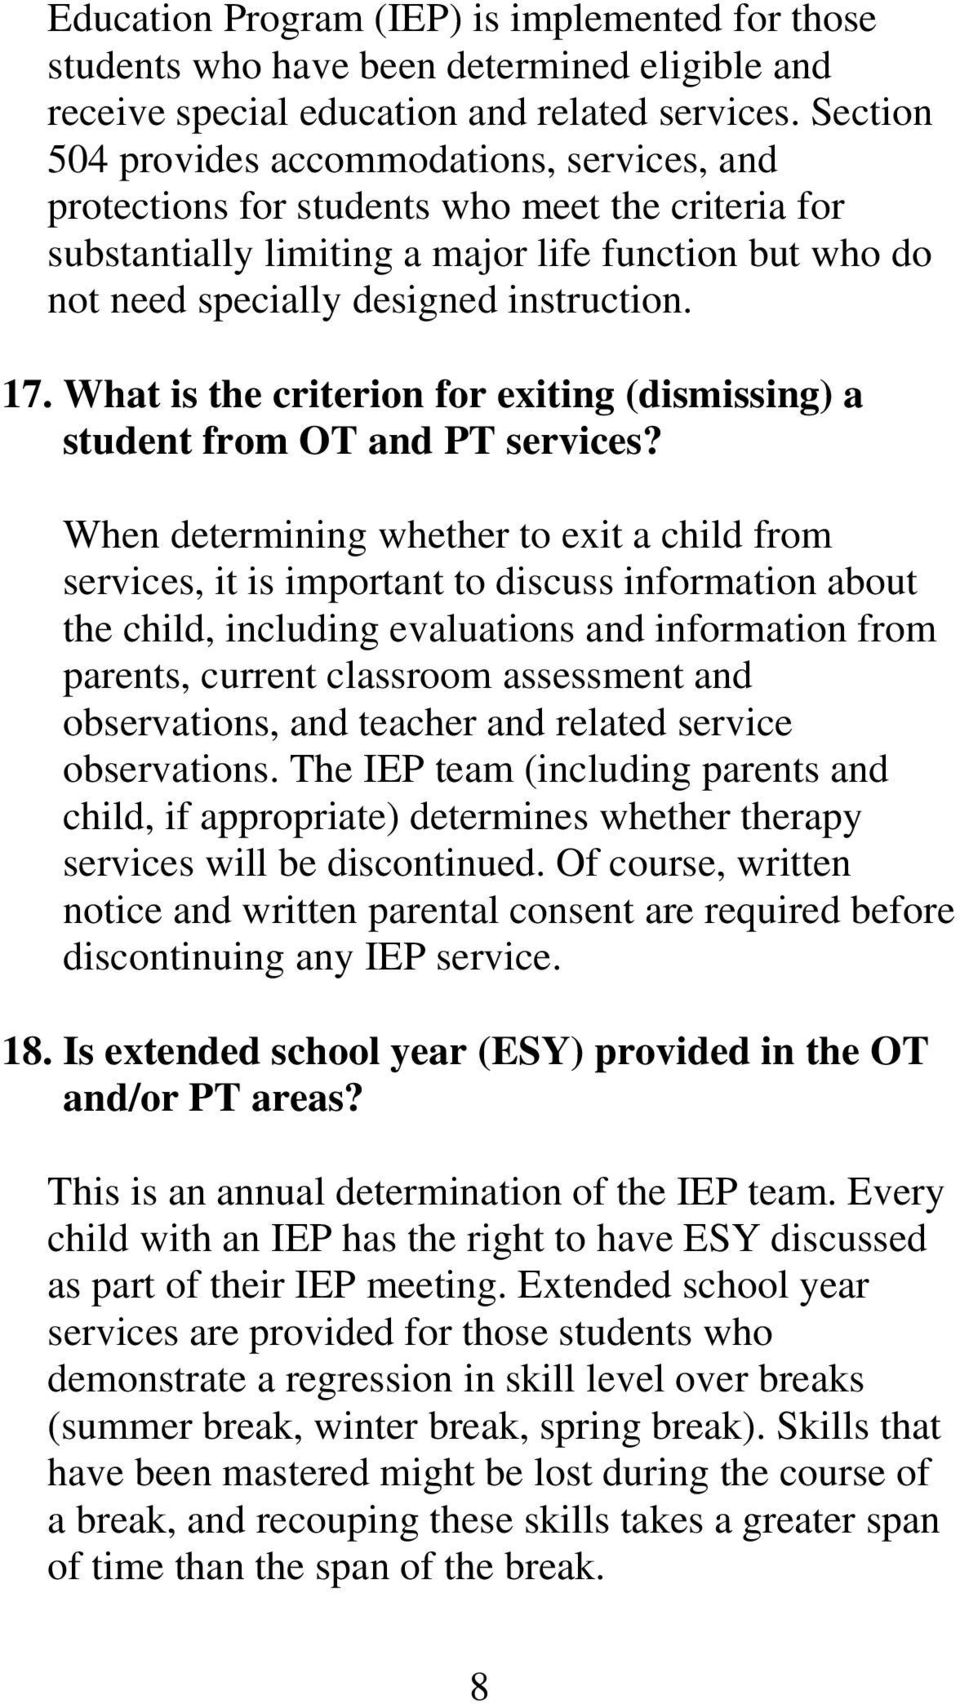 17. What is the criterion for exiting (dismissing) a student from OT and PT services?